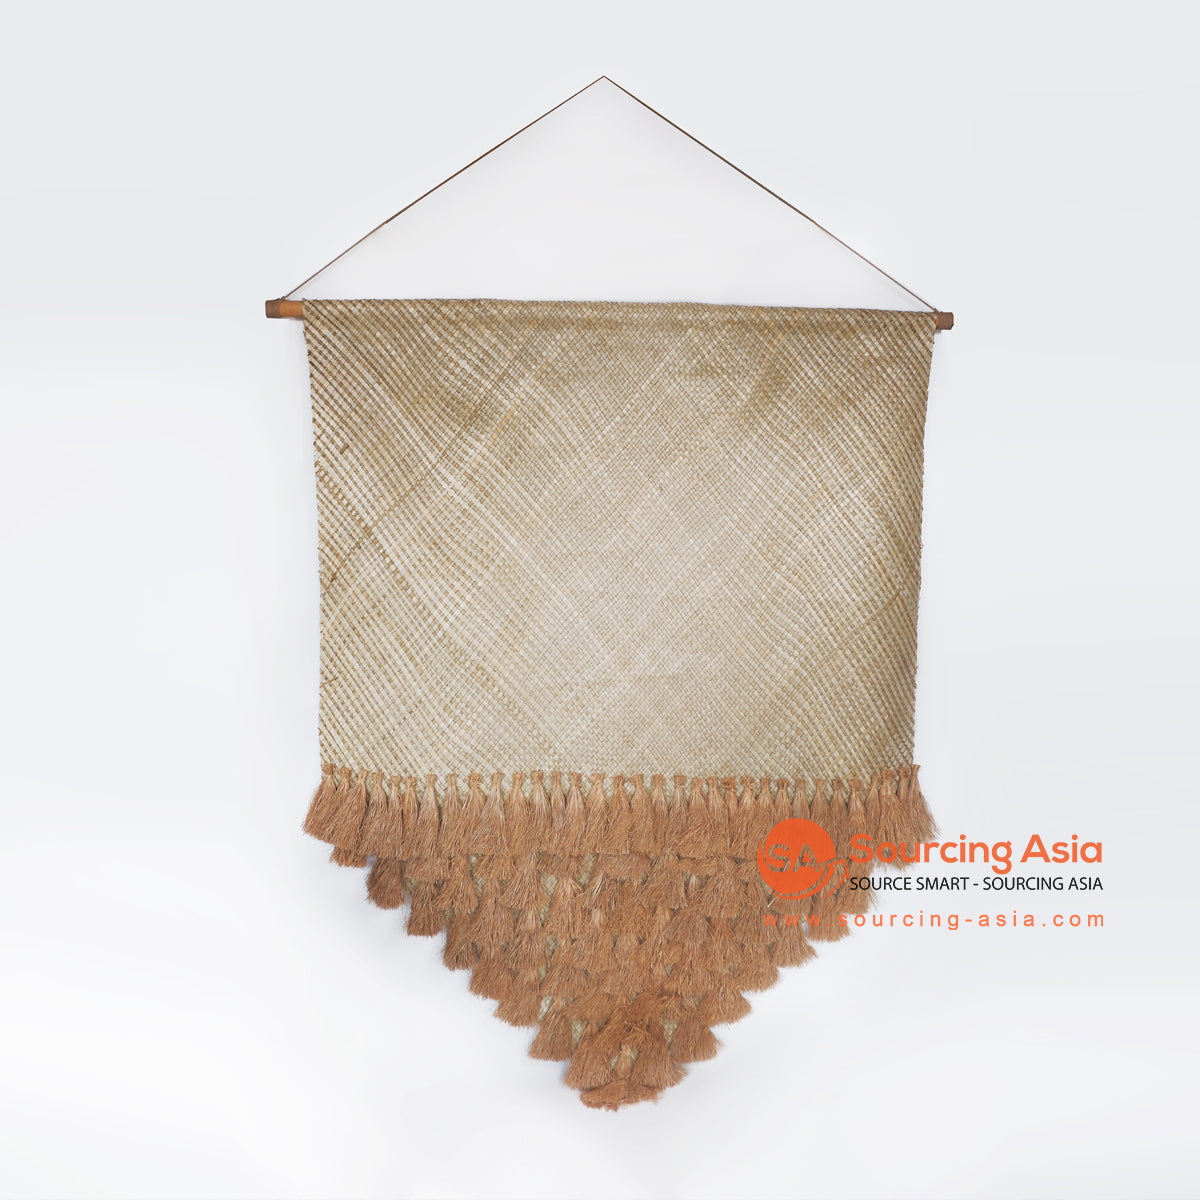 MRC329 NATURAL WOVEN PANDANUS WALL DECORATION WITH BROWN TASSELS